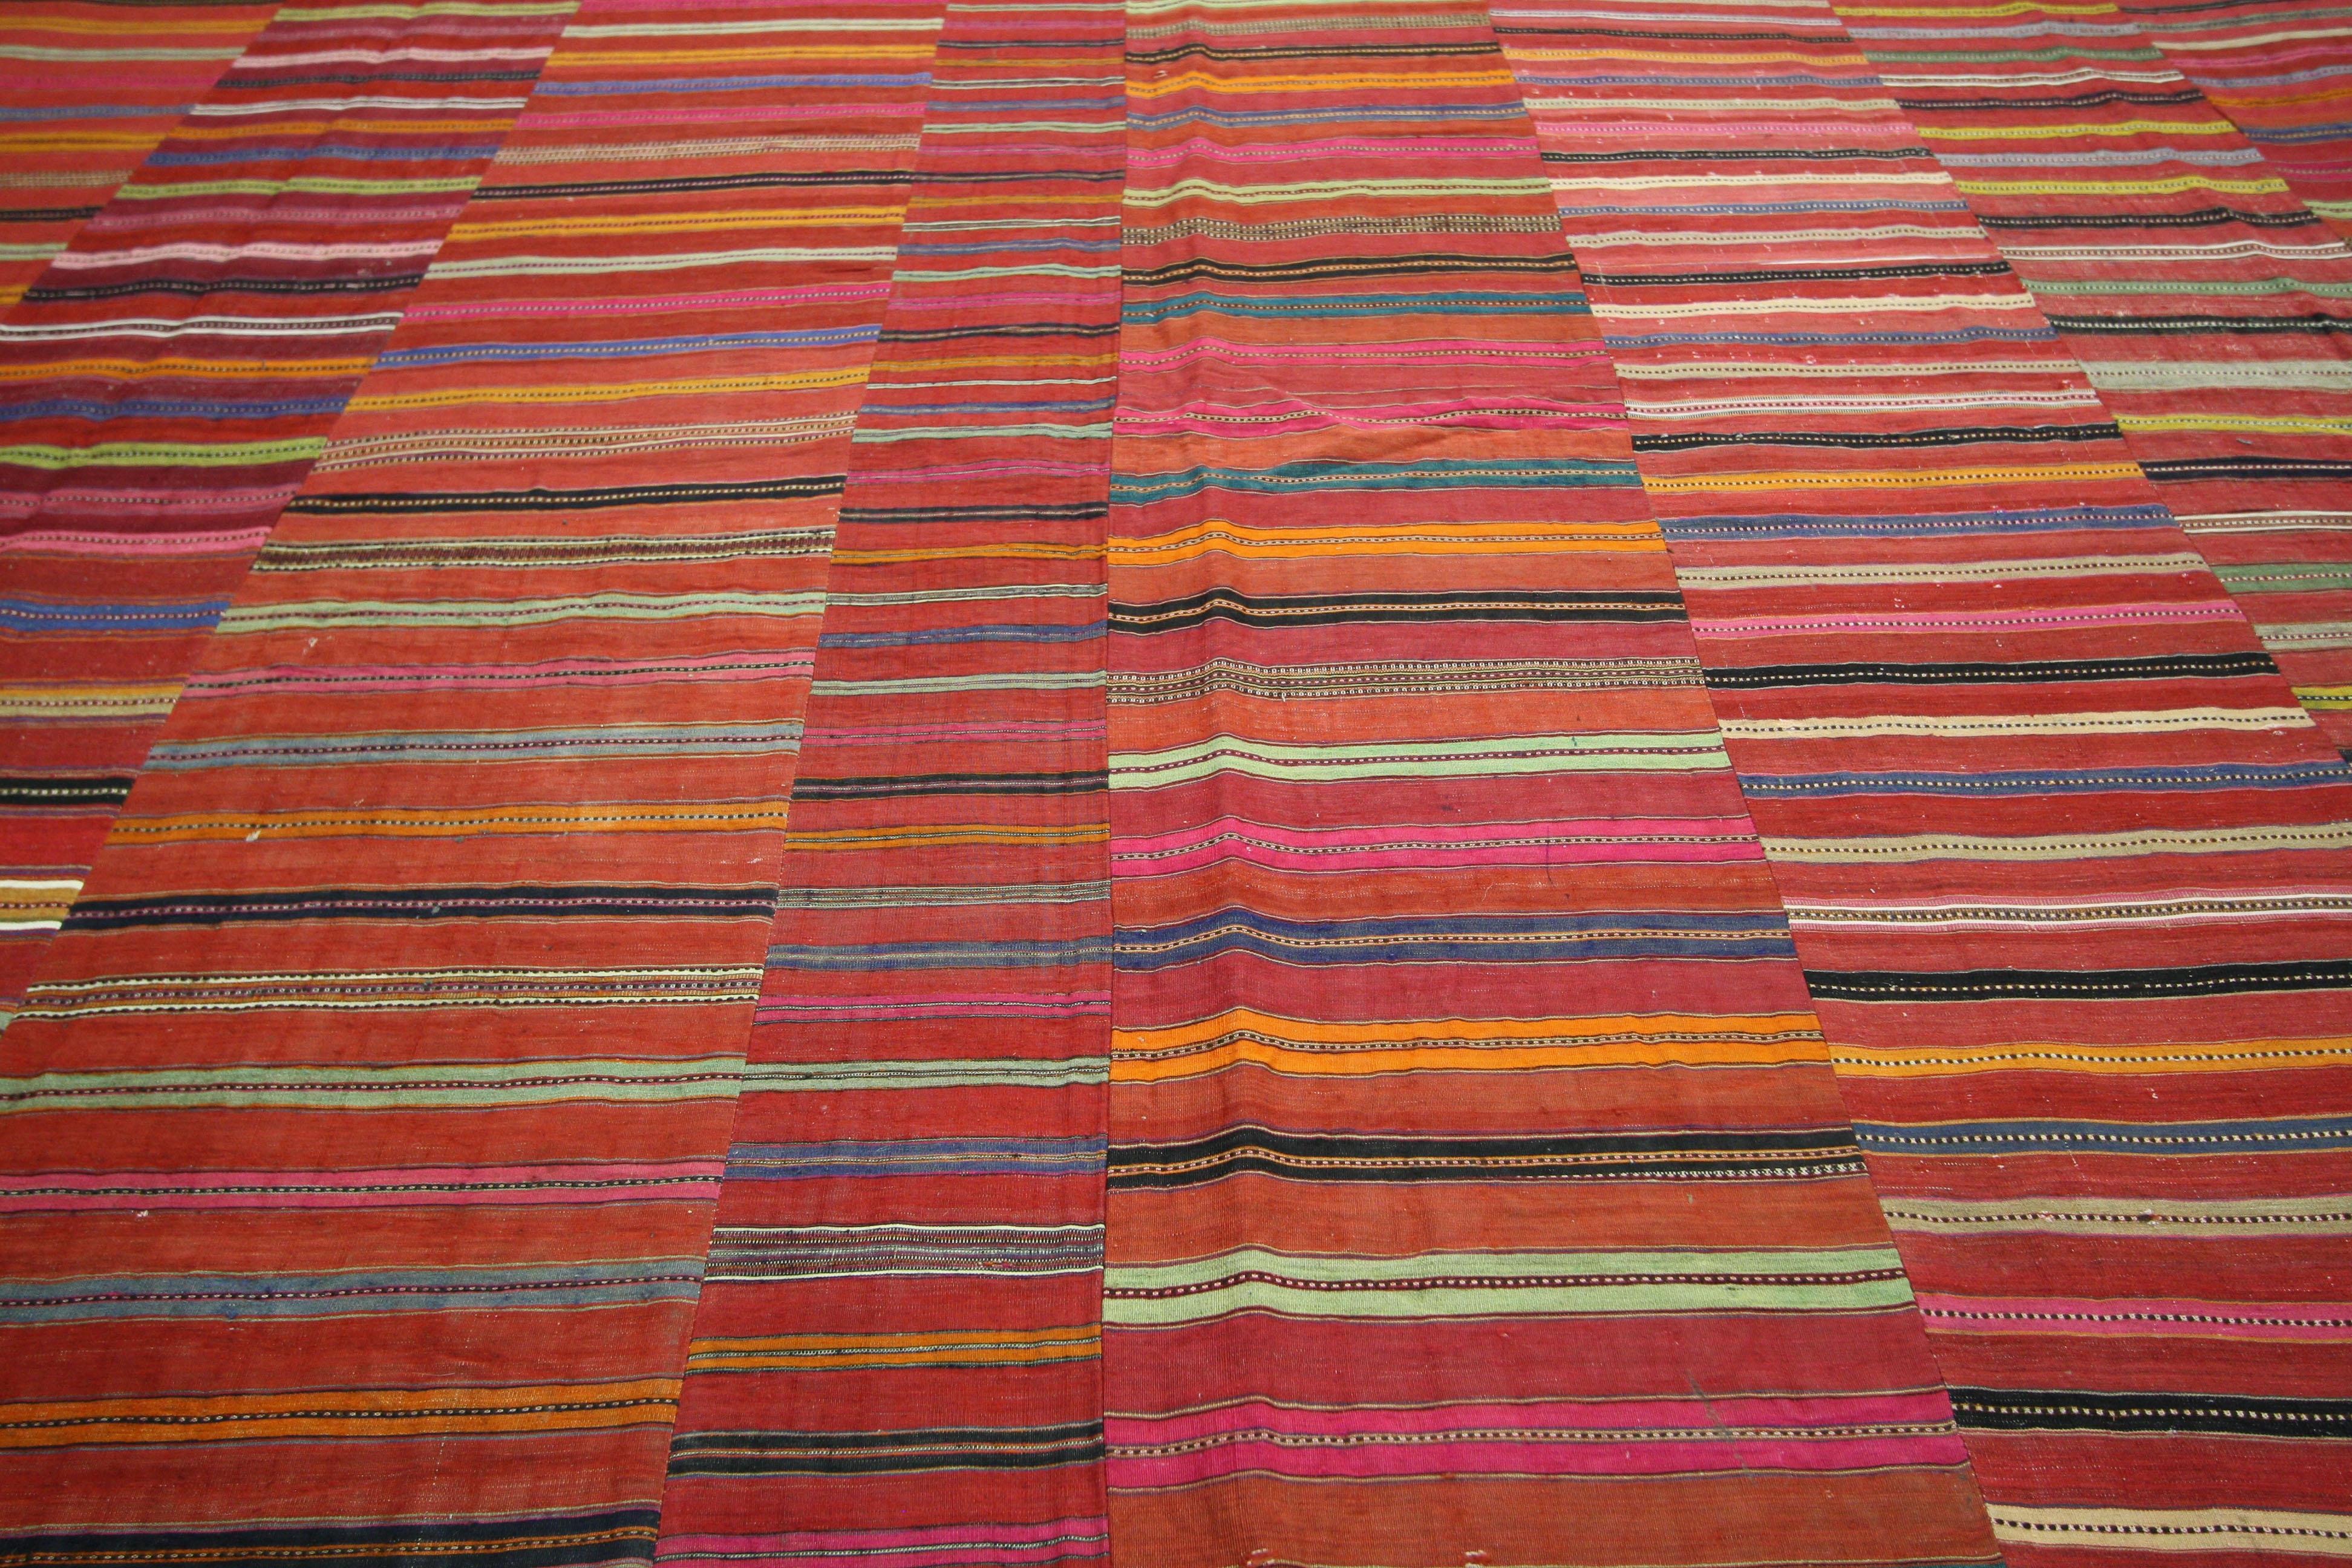 Industrial Distressed Vintage Turkish Kilim Rug with Bayadere Stripes and Rustic Style